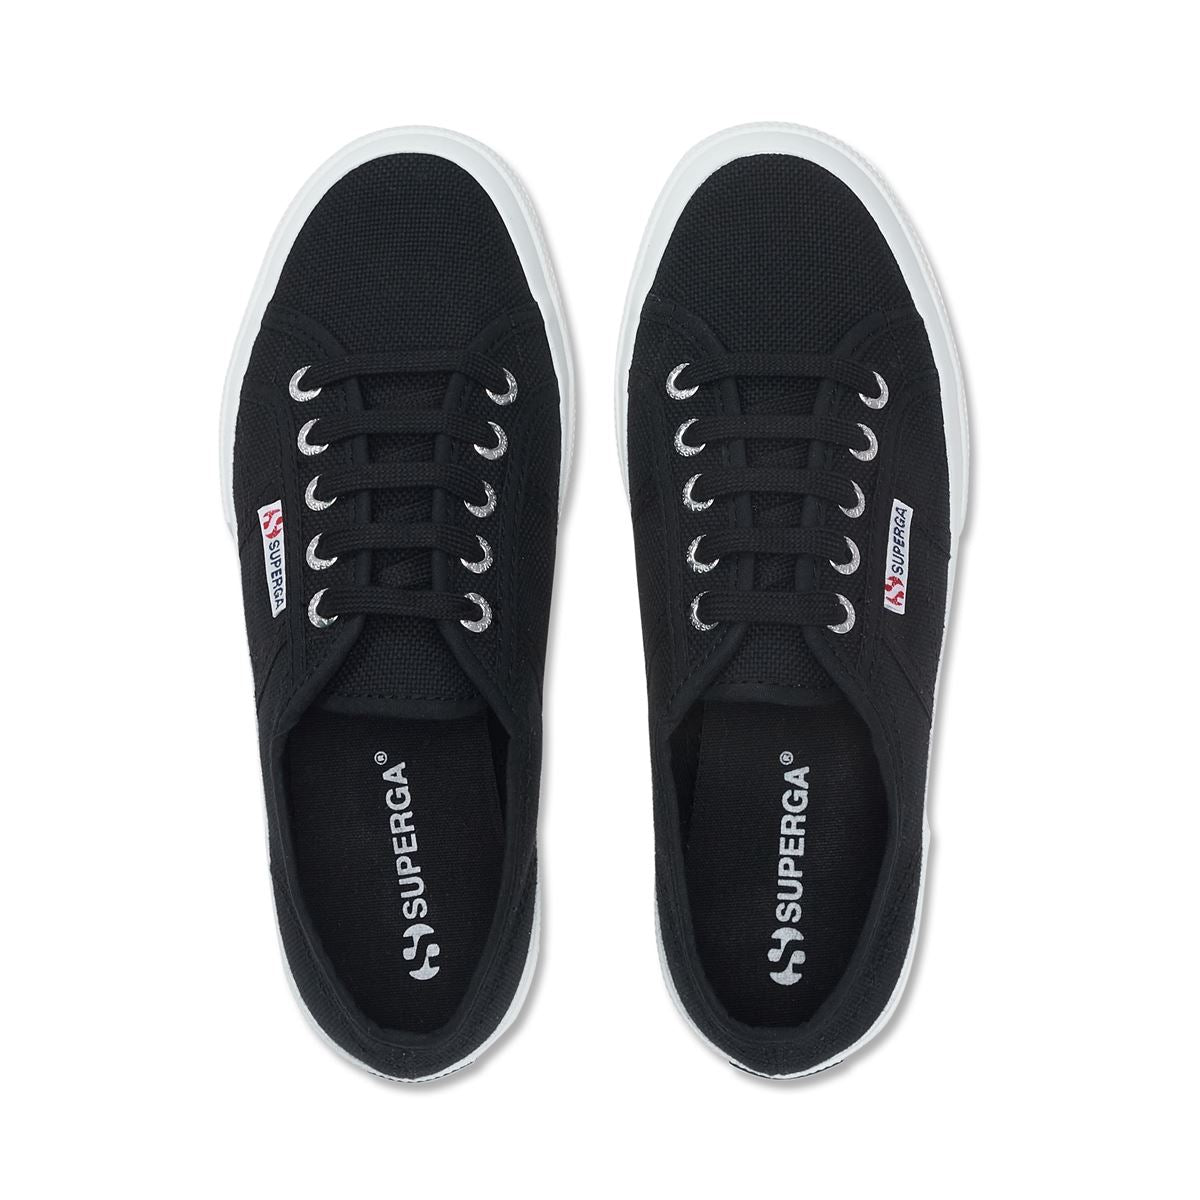 pair of navy canvas Superga shoes top angle